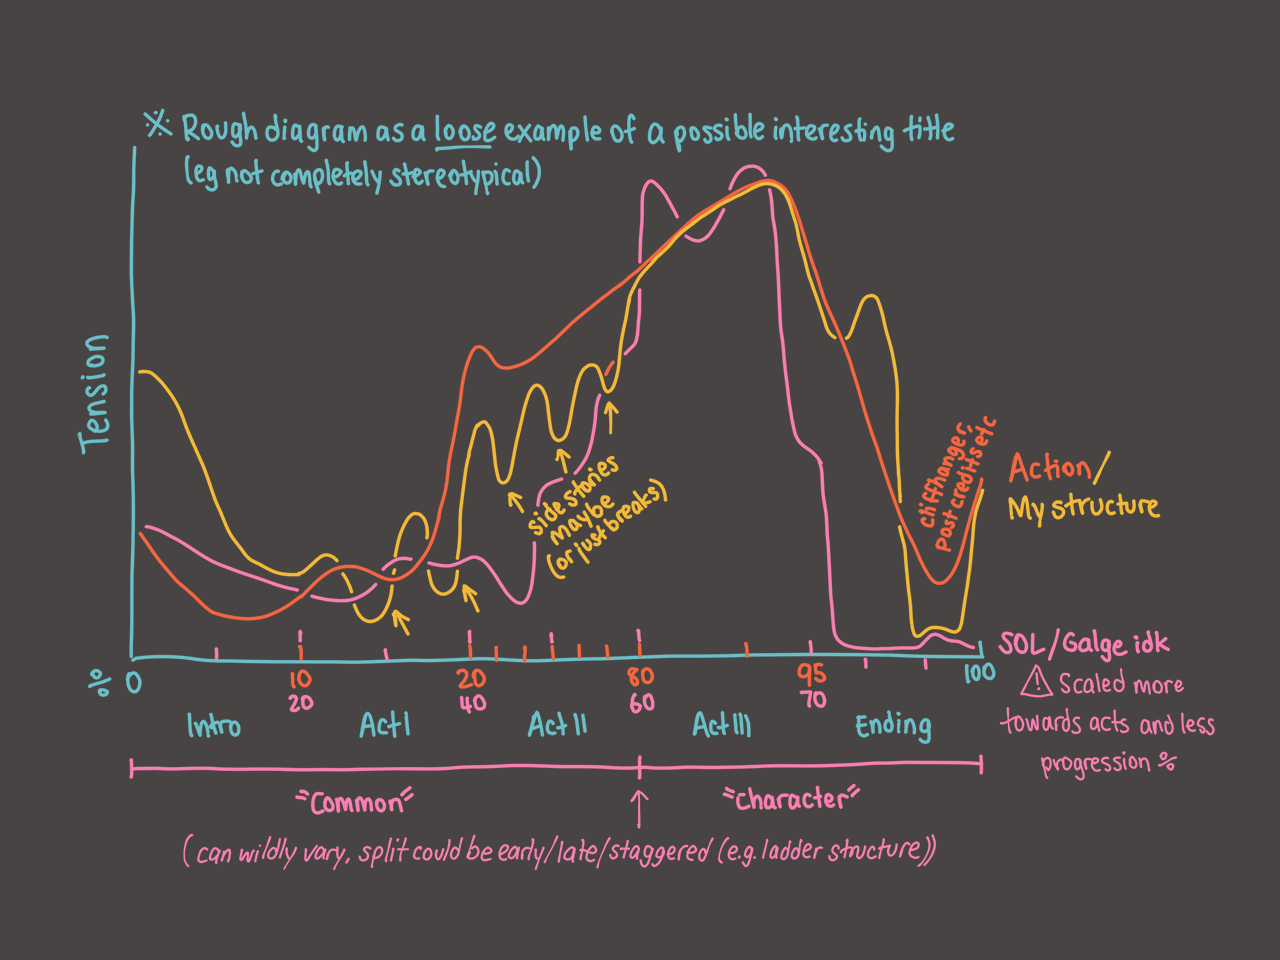 A graph displaying the relation between story progress and its tension. My kind of stories, along with action, roughly follow a steady rise then a steep drop at the ending (except mine goes up and down in waves from Act I to Act II). Slice of life and character-centric stories often follow a different curve and act length altogether; the story can be split into two parts, consisting of the “common” and ”character“ routes (term based on the branching nature of the genre).